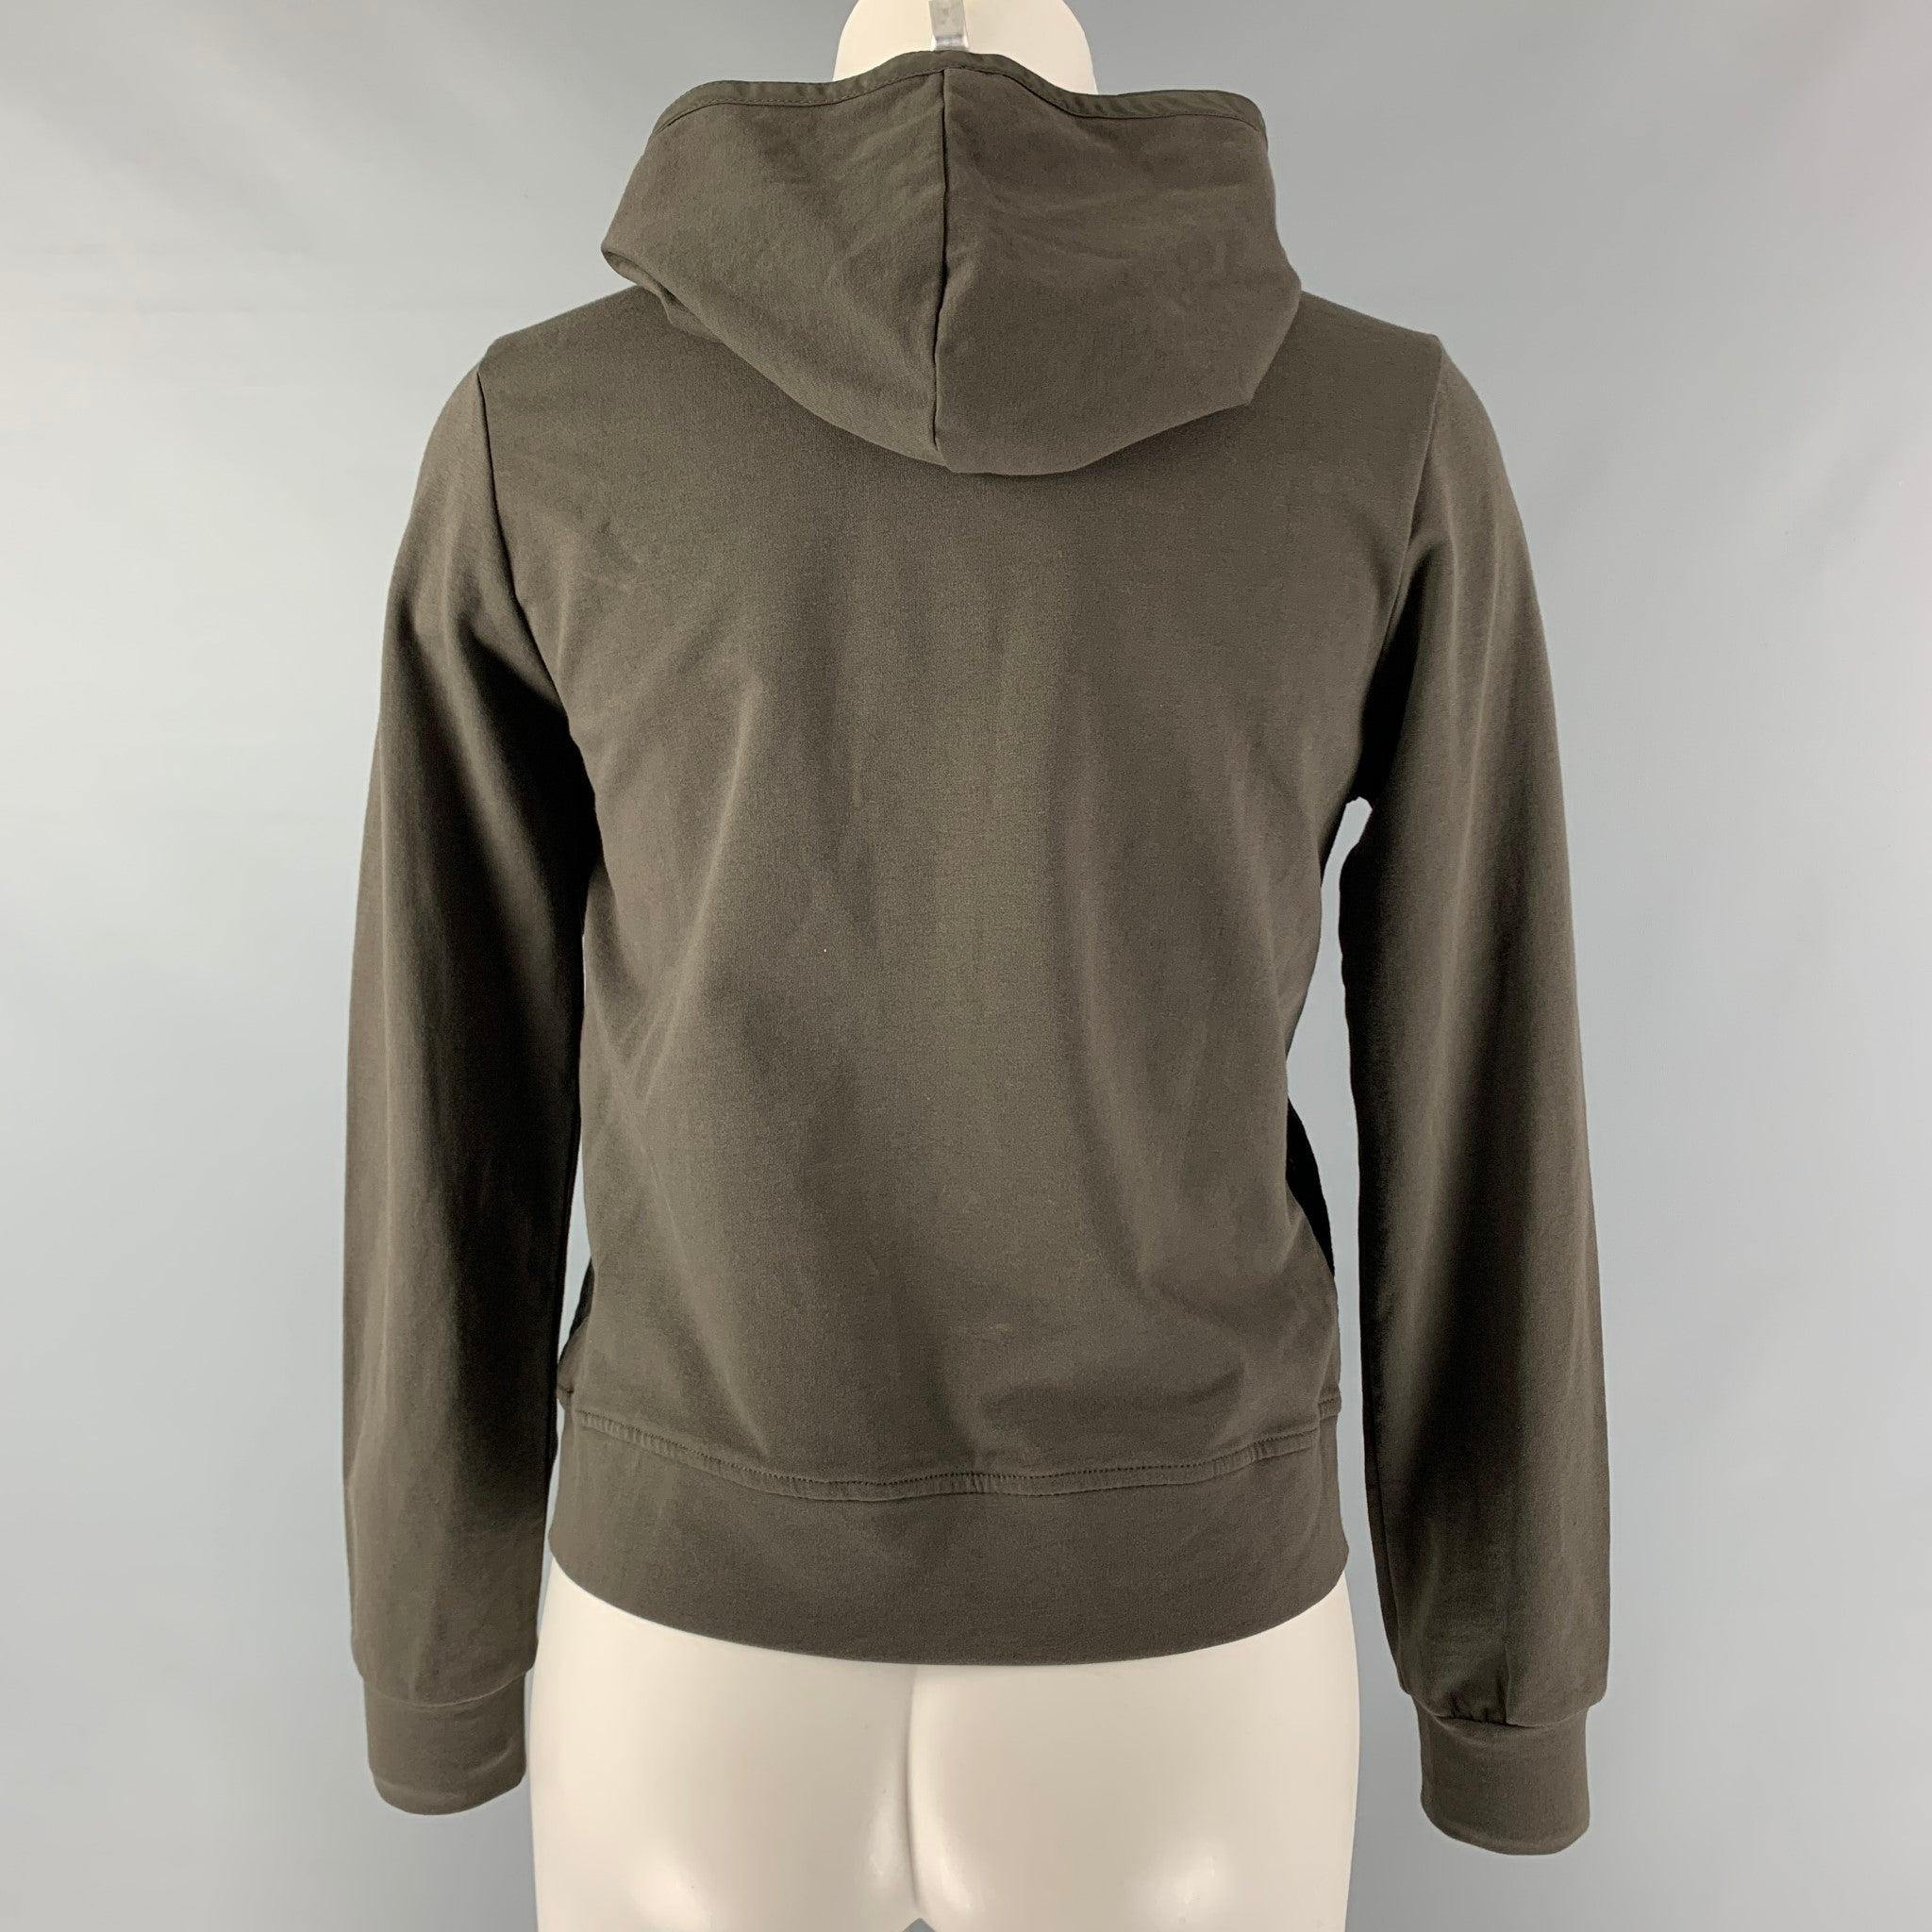 PRADA Size L Olive Mixed Fabrics Hoodie Casual Top In Good Condition For Sale In San Francisco, CA